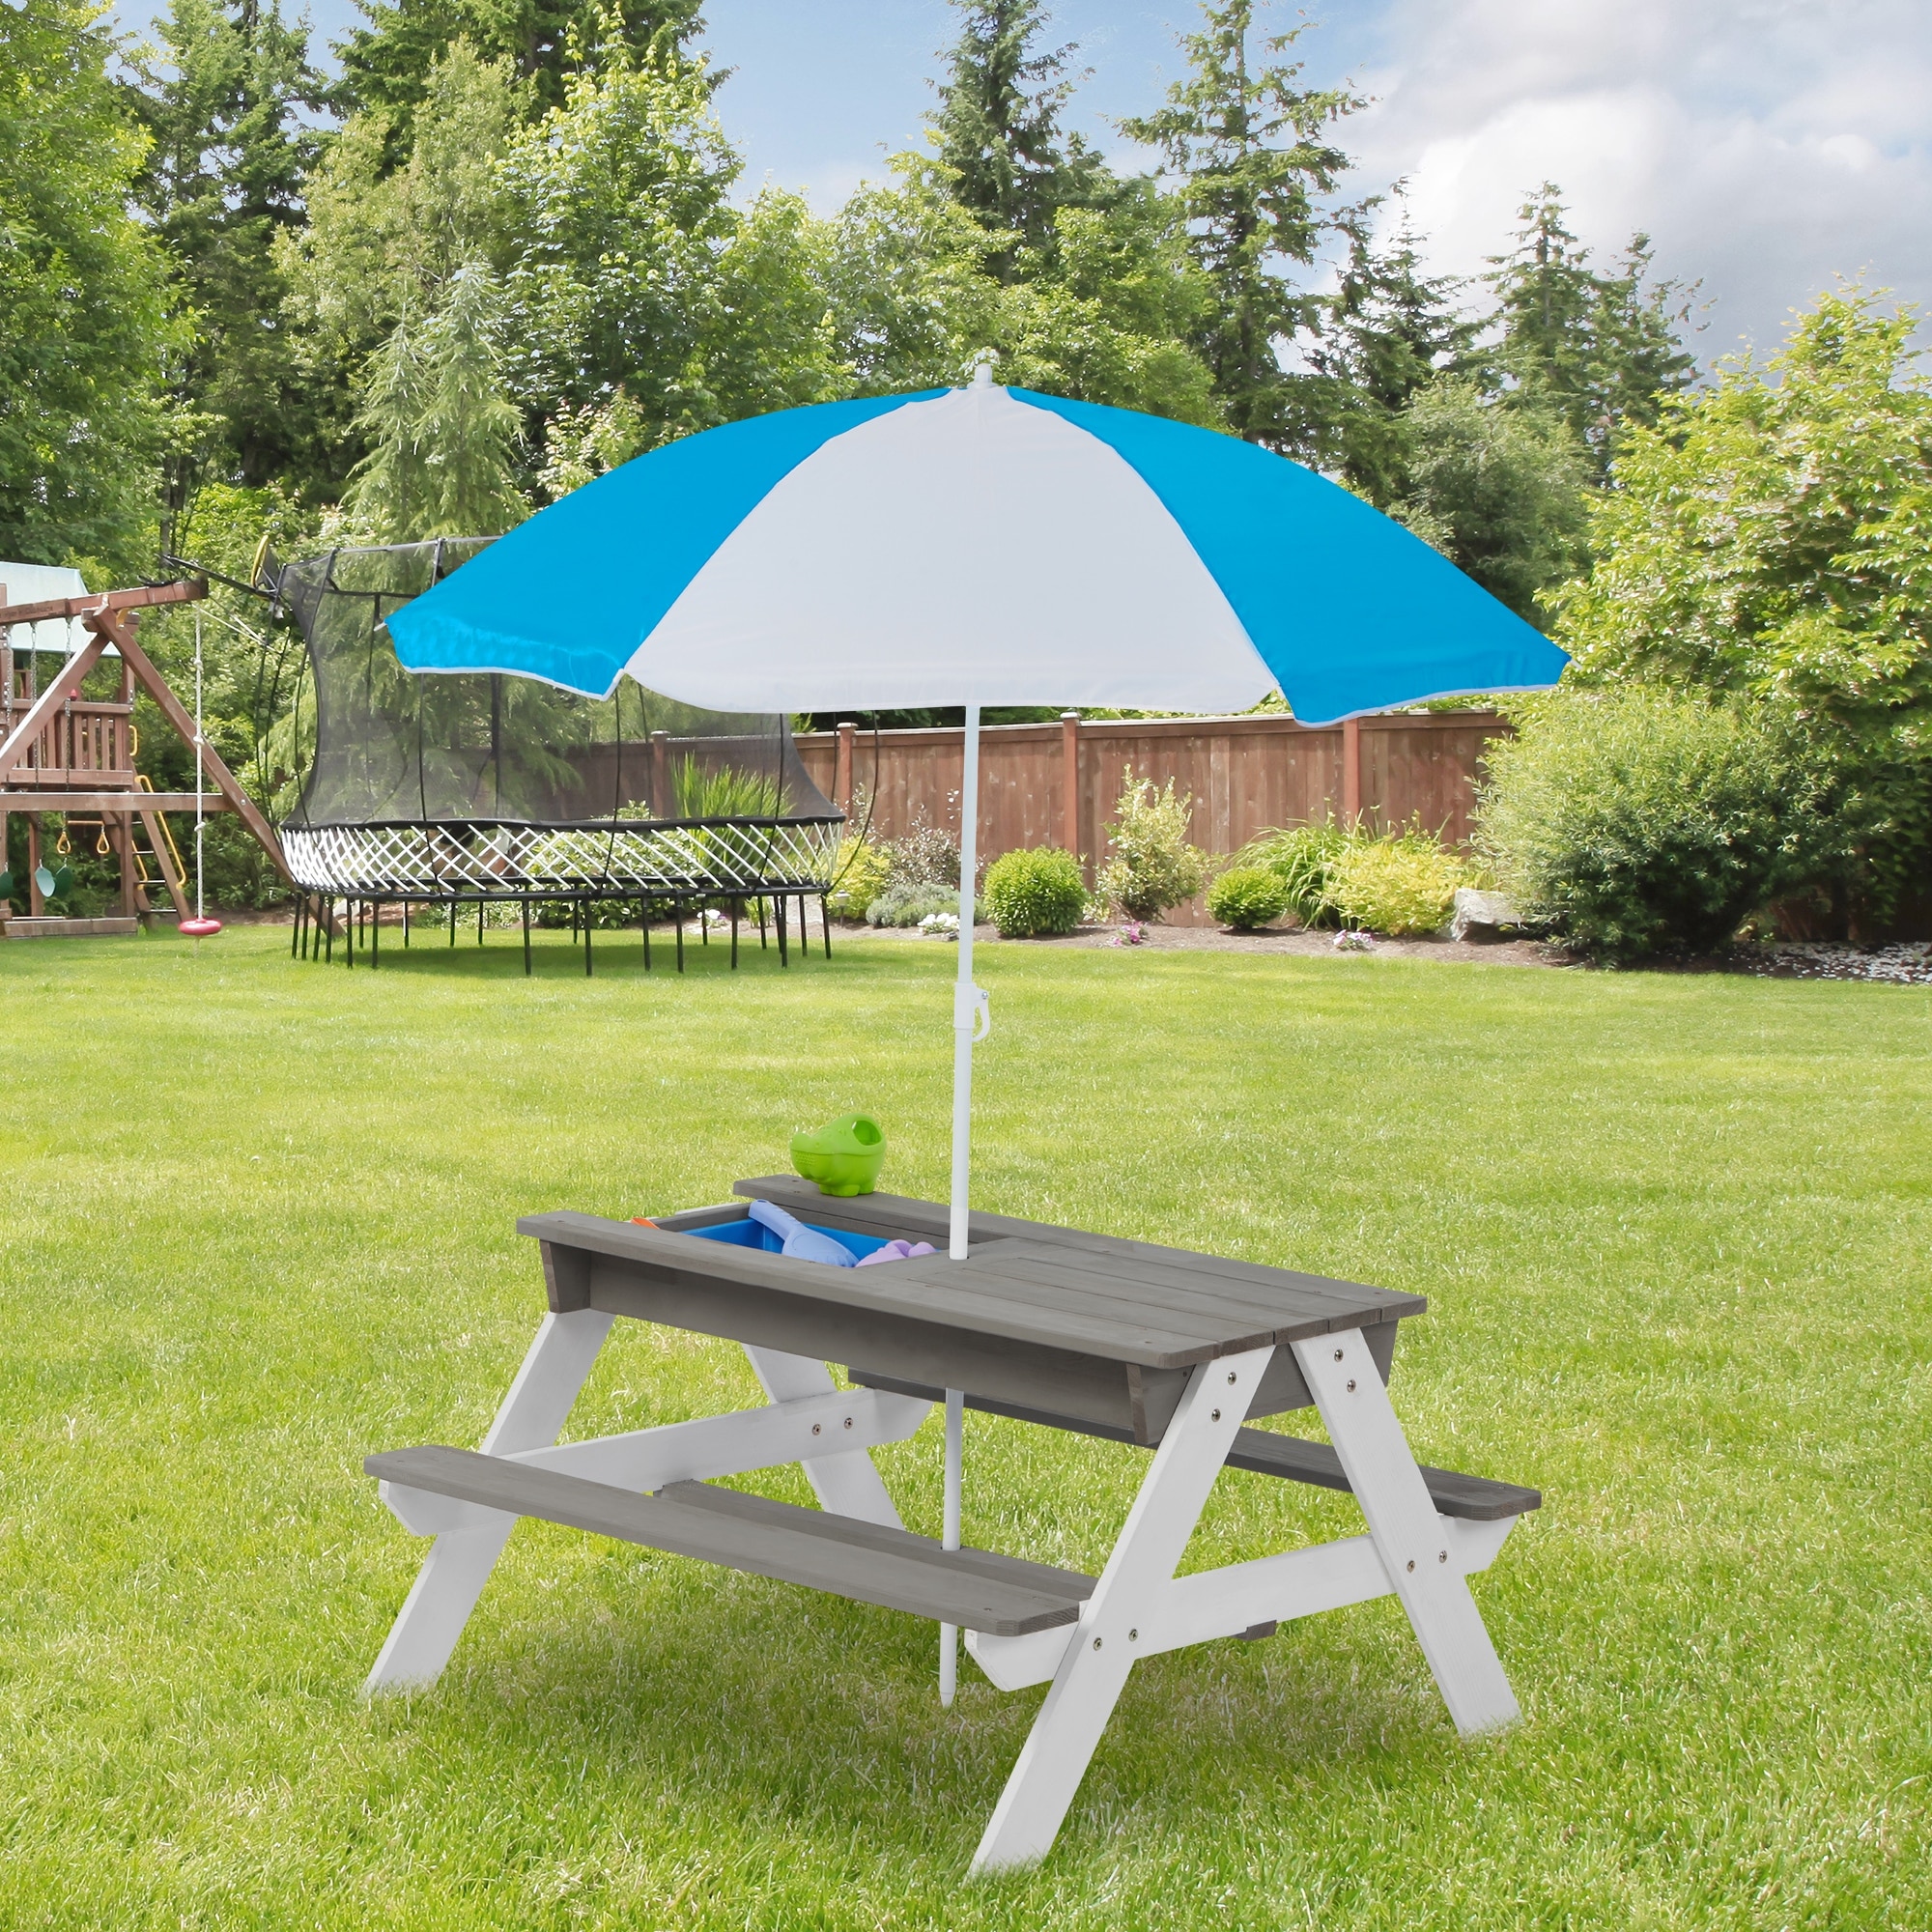 3-in-1 Kids Outdoor Wooden Picnic Table  Conversation Sets  With Umbrella  Convertible Sand and Wate  For Garden Backyard Beach